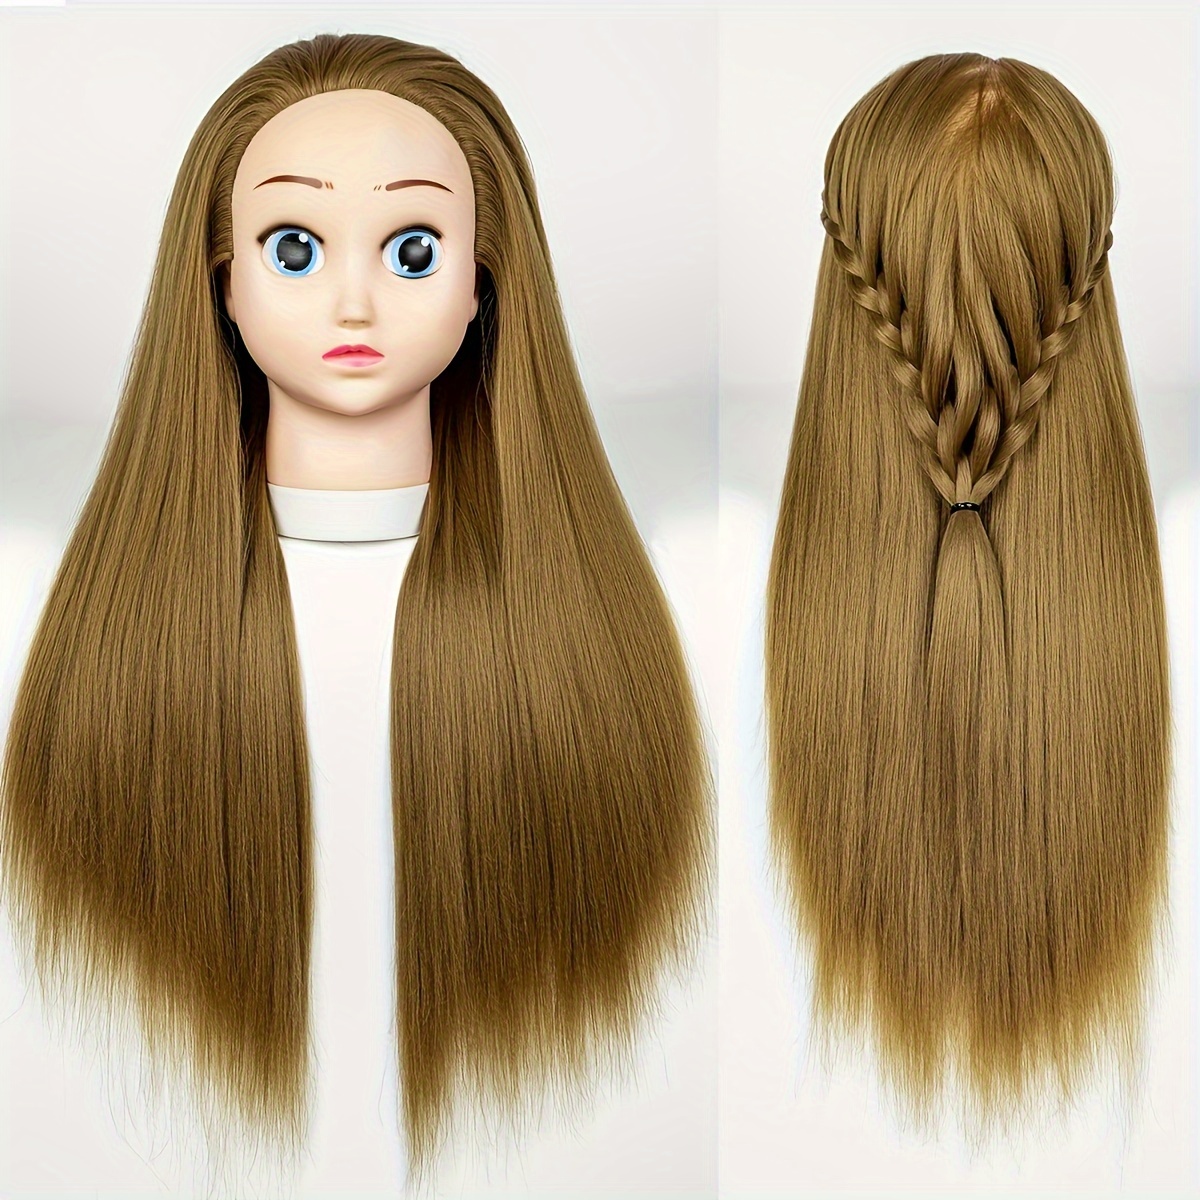 Mannequin Head with 70% Real Hair, TopDirect 26 Hair Mannequin